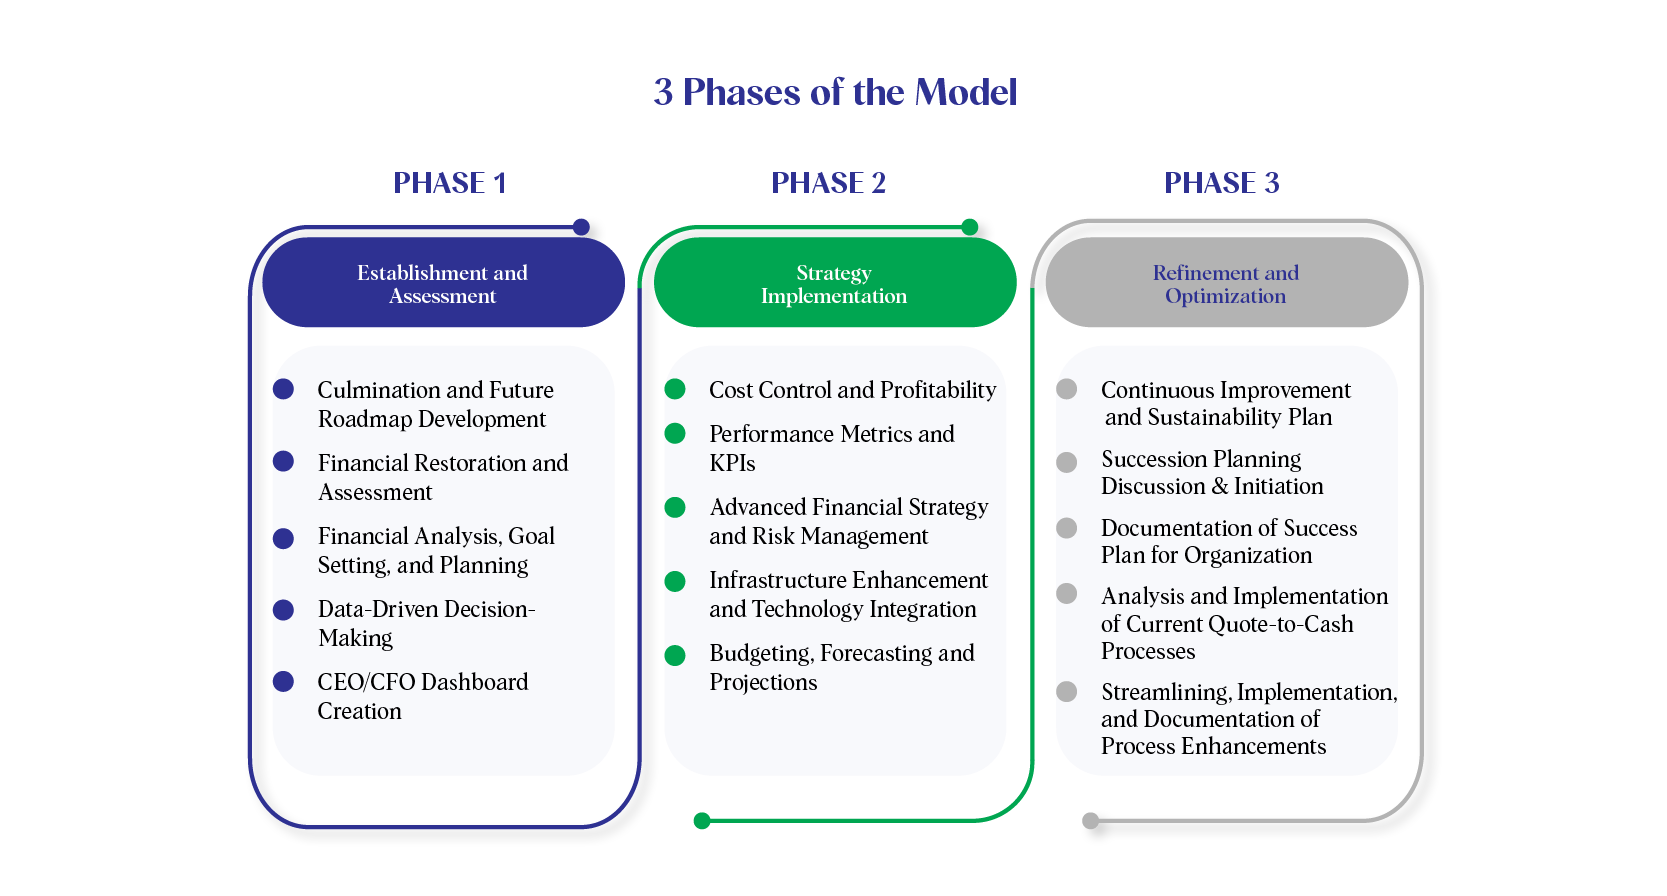 b. Phases of the Model